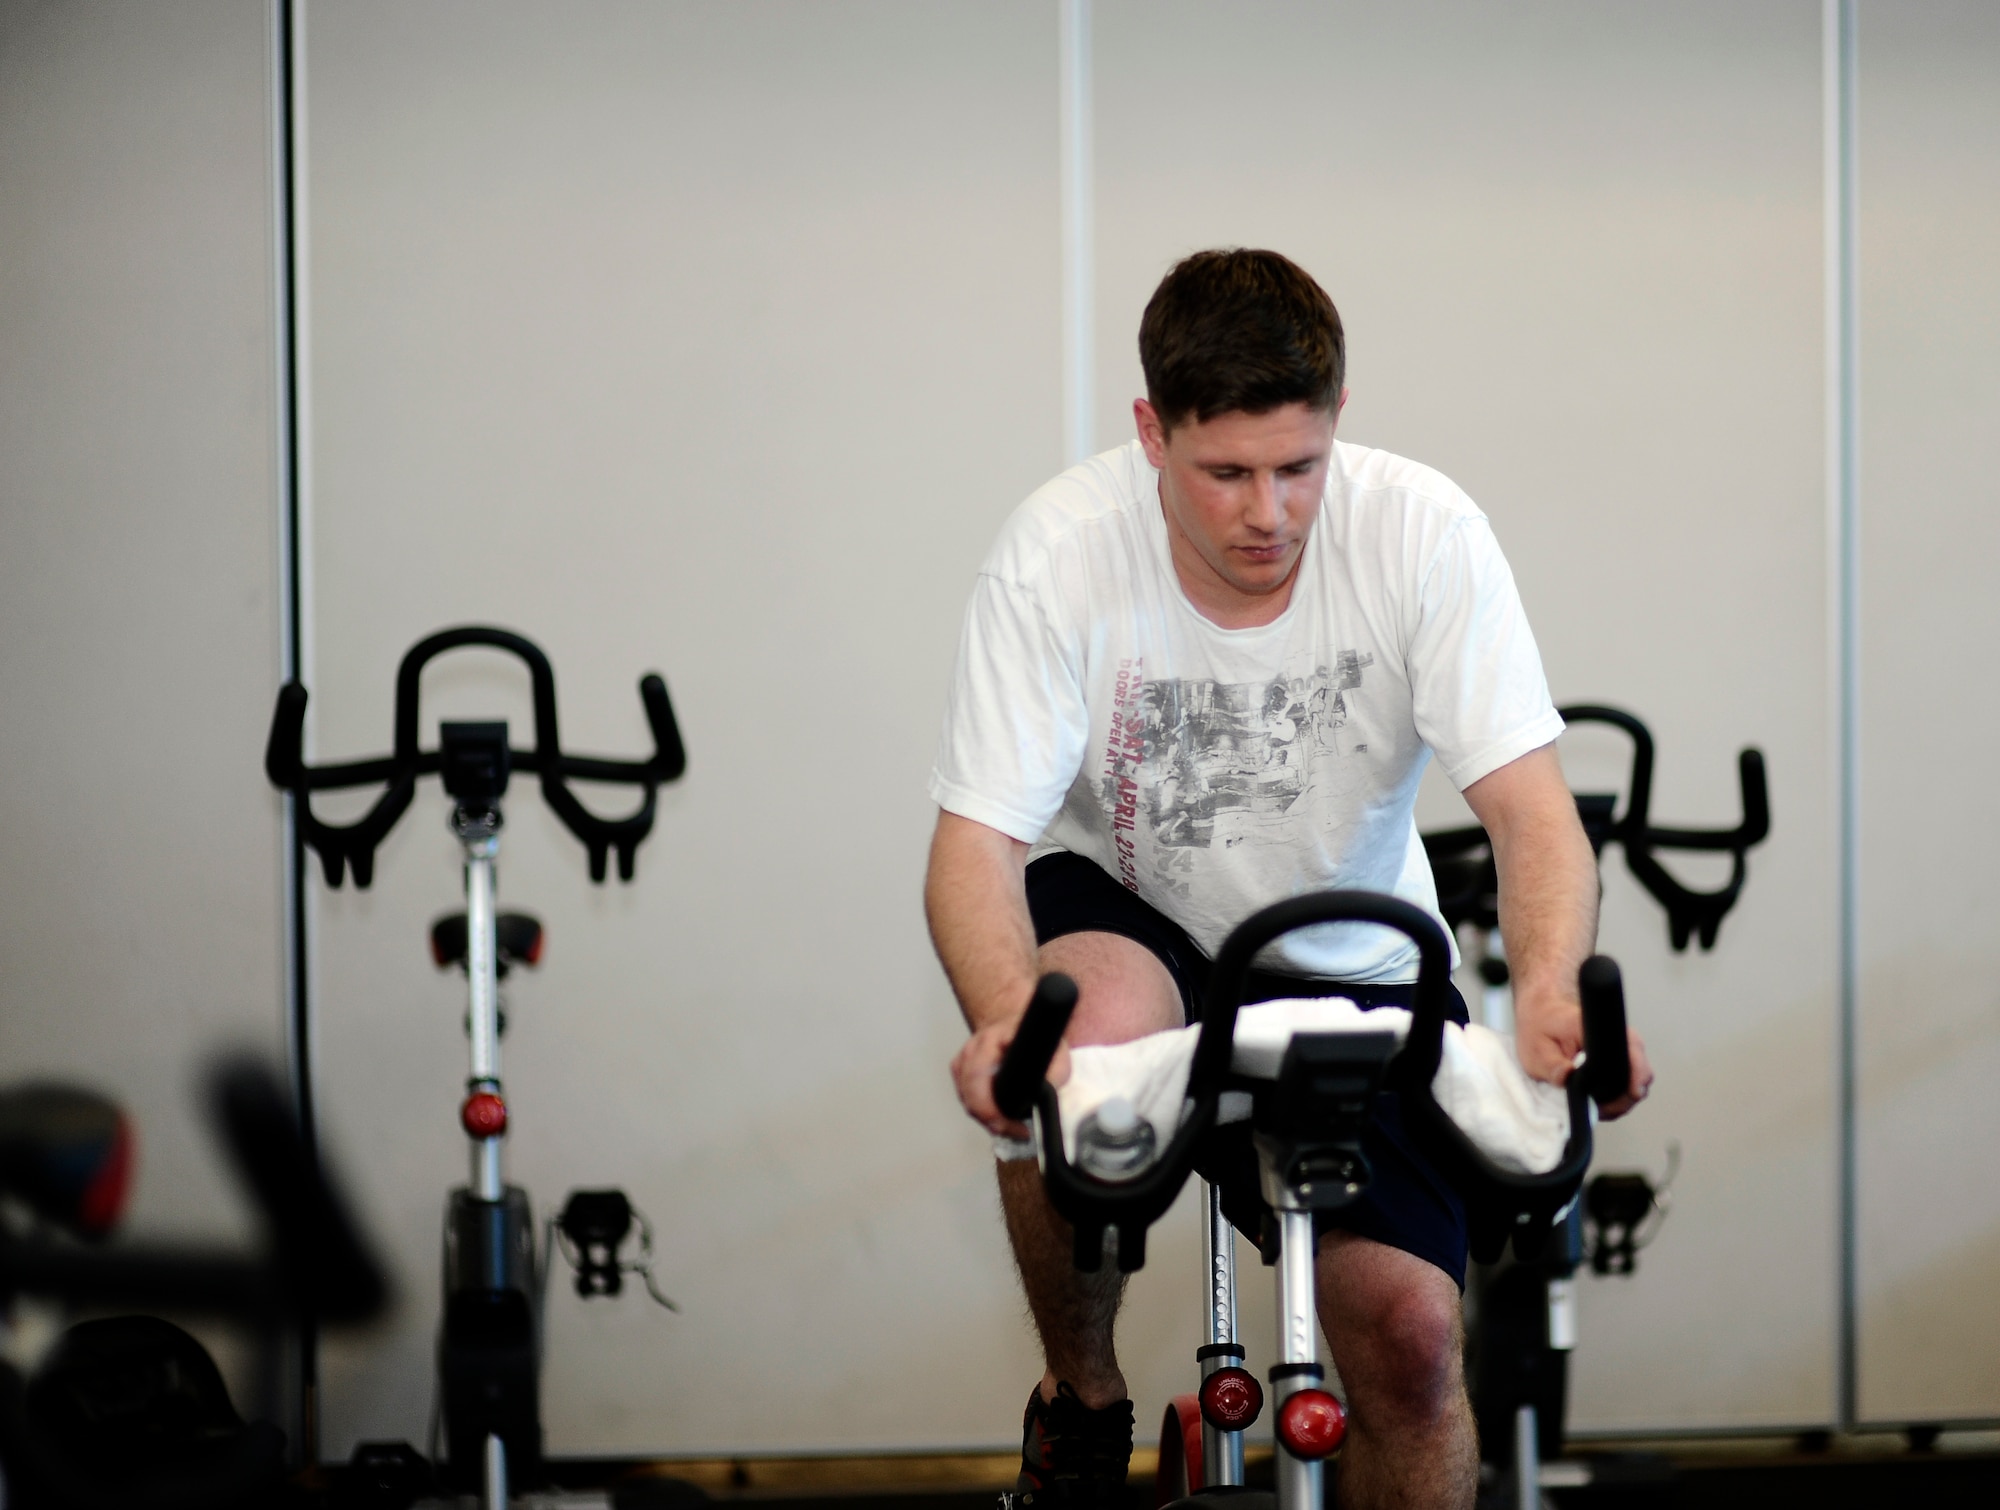 Senior Airman Michael Satterelli, 460th Space Wing executive assistant, cycles during Buckley’s annual Spin-A-Thon, April 11, 2014, at the fitness center on Buckley Air Force Base, Colo. Every hour, one person from each 460th Space Wing unit participated in a 45-minute spin class, competing for Commander’s Cup points. (U.S. Air Force photo by Airman 1st Class Samantha Saulsbury/Released)